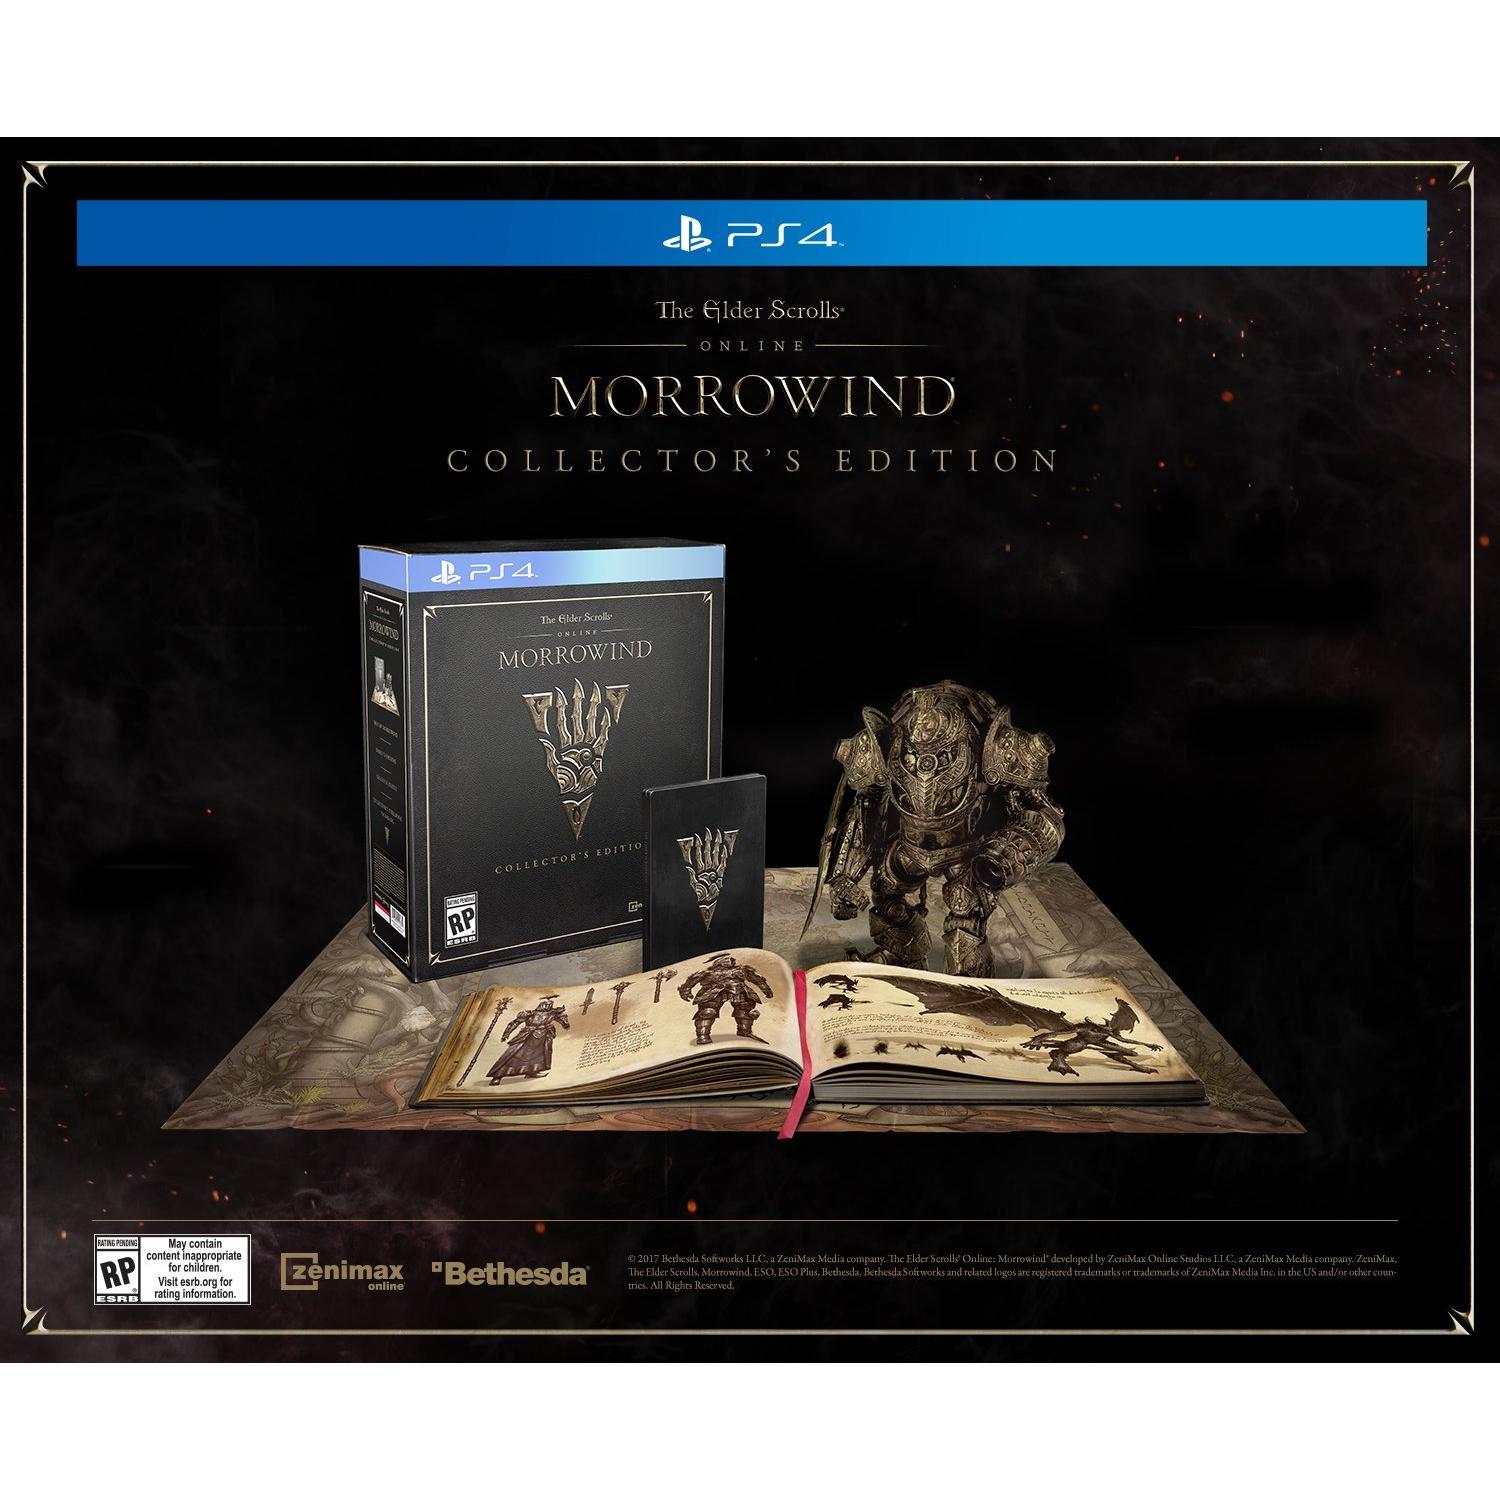 PS4 - The Elder Scrolls Online Morrowind Collector's Edition (Sealed)